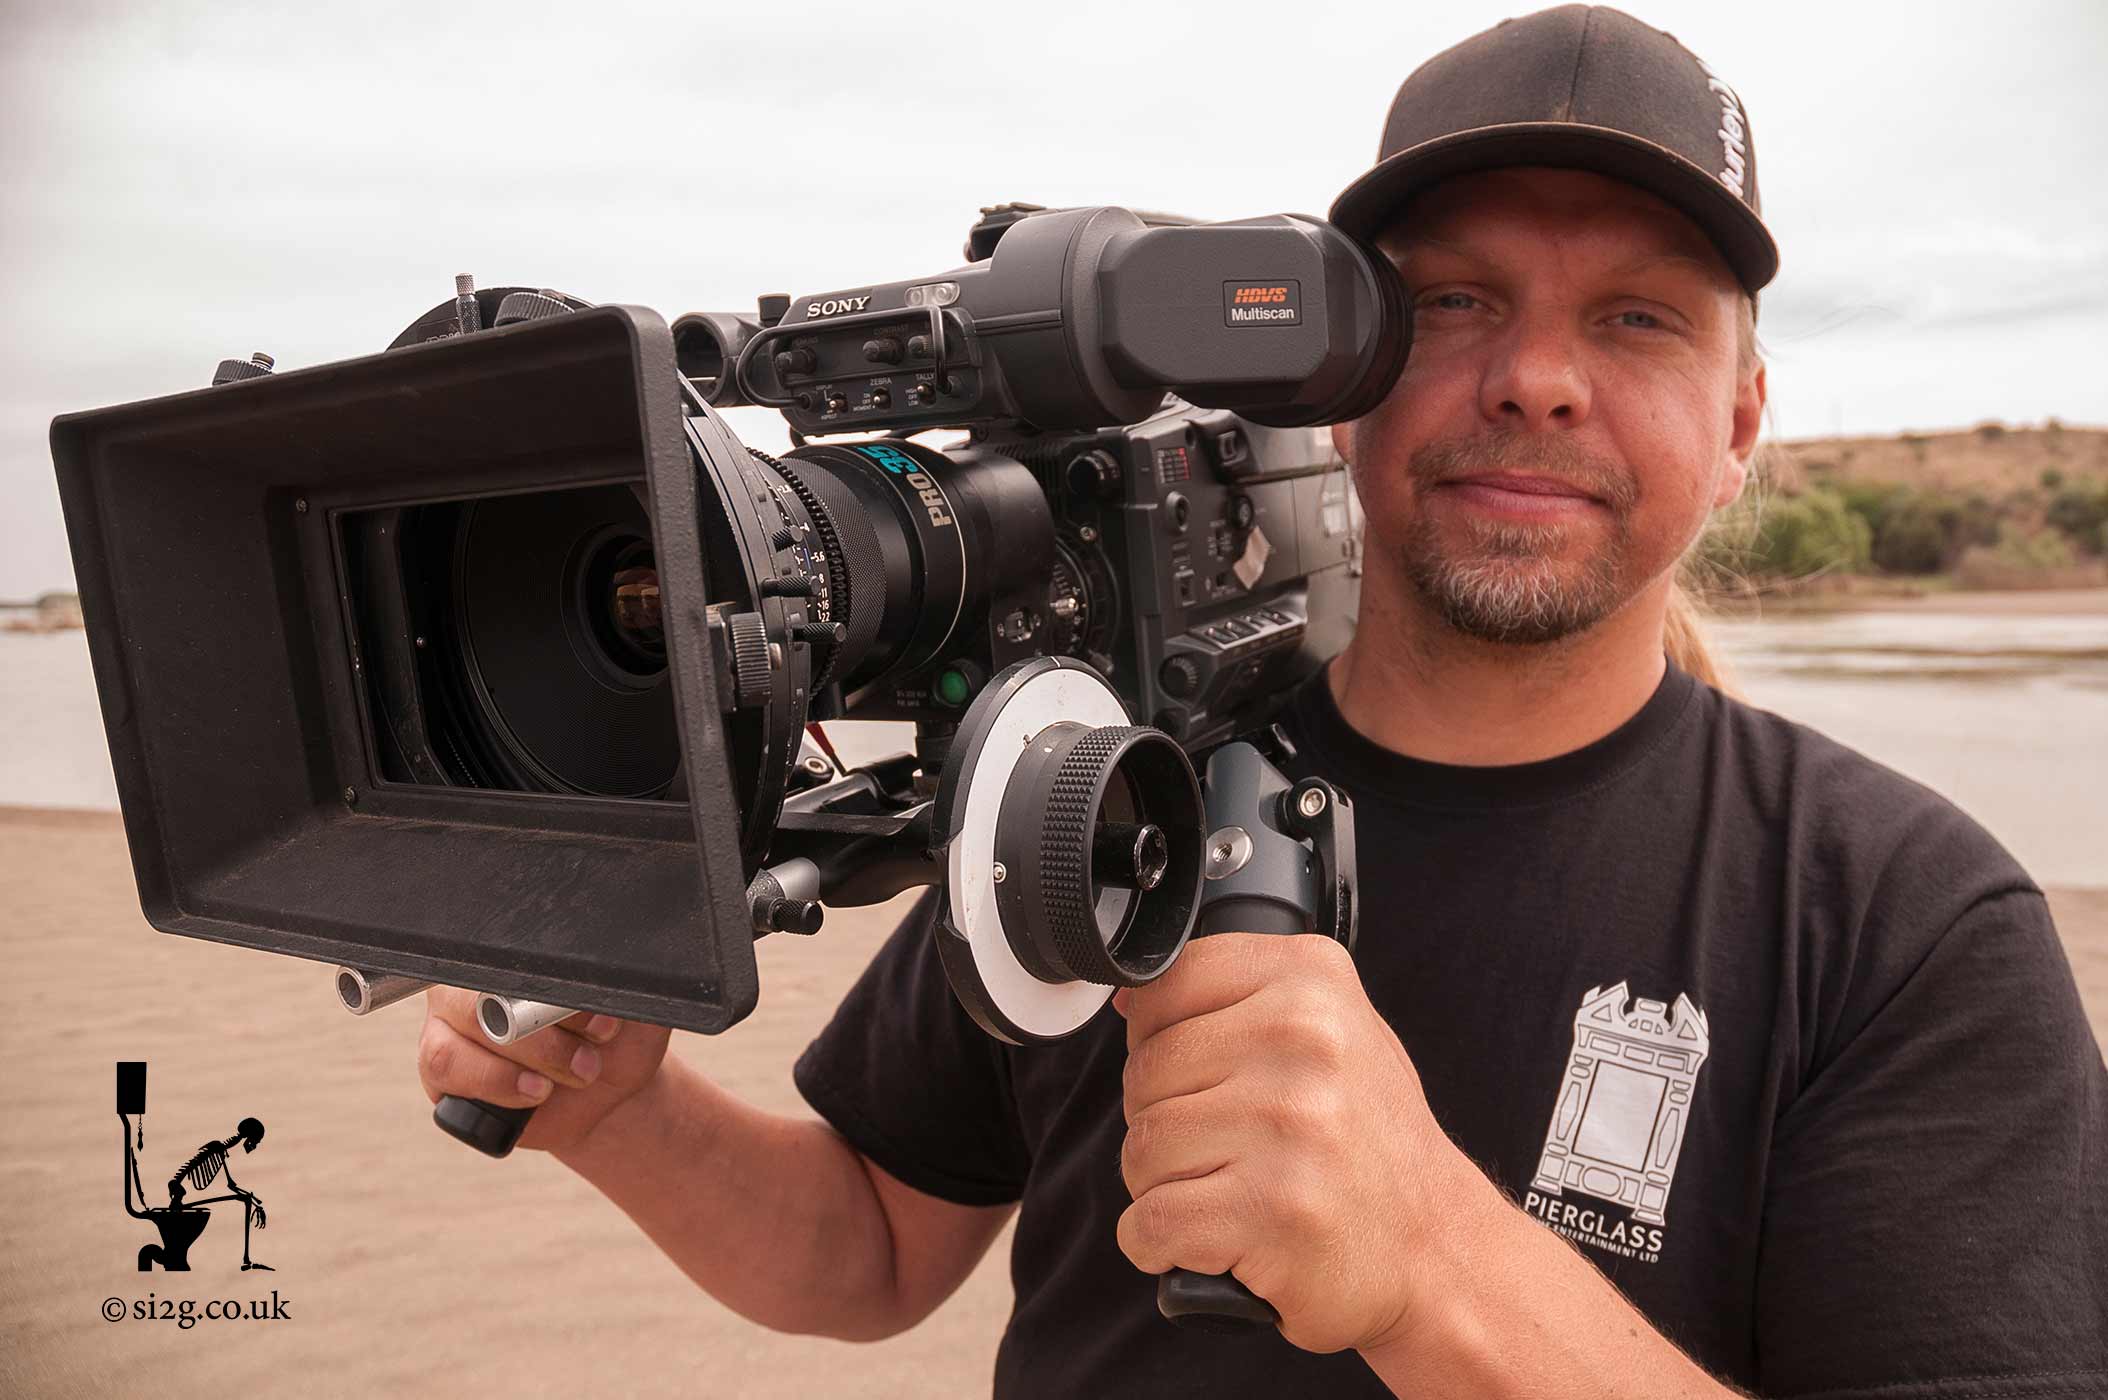 Director of Photography - Simon going handheld with a Sony HDW-750P, Pro35 lens adapter and an 18mm prime lens, complete with follow-focus and moose-bars.  Old school tape-based HDCAM video format.